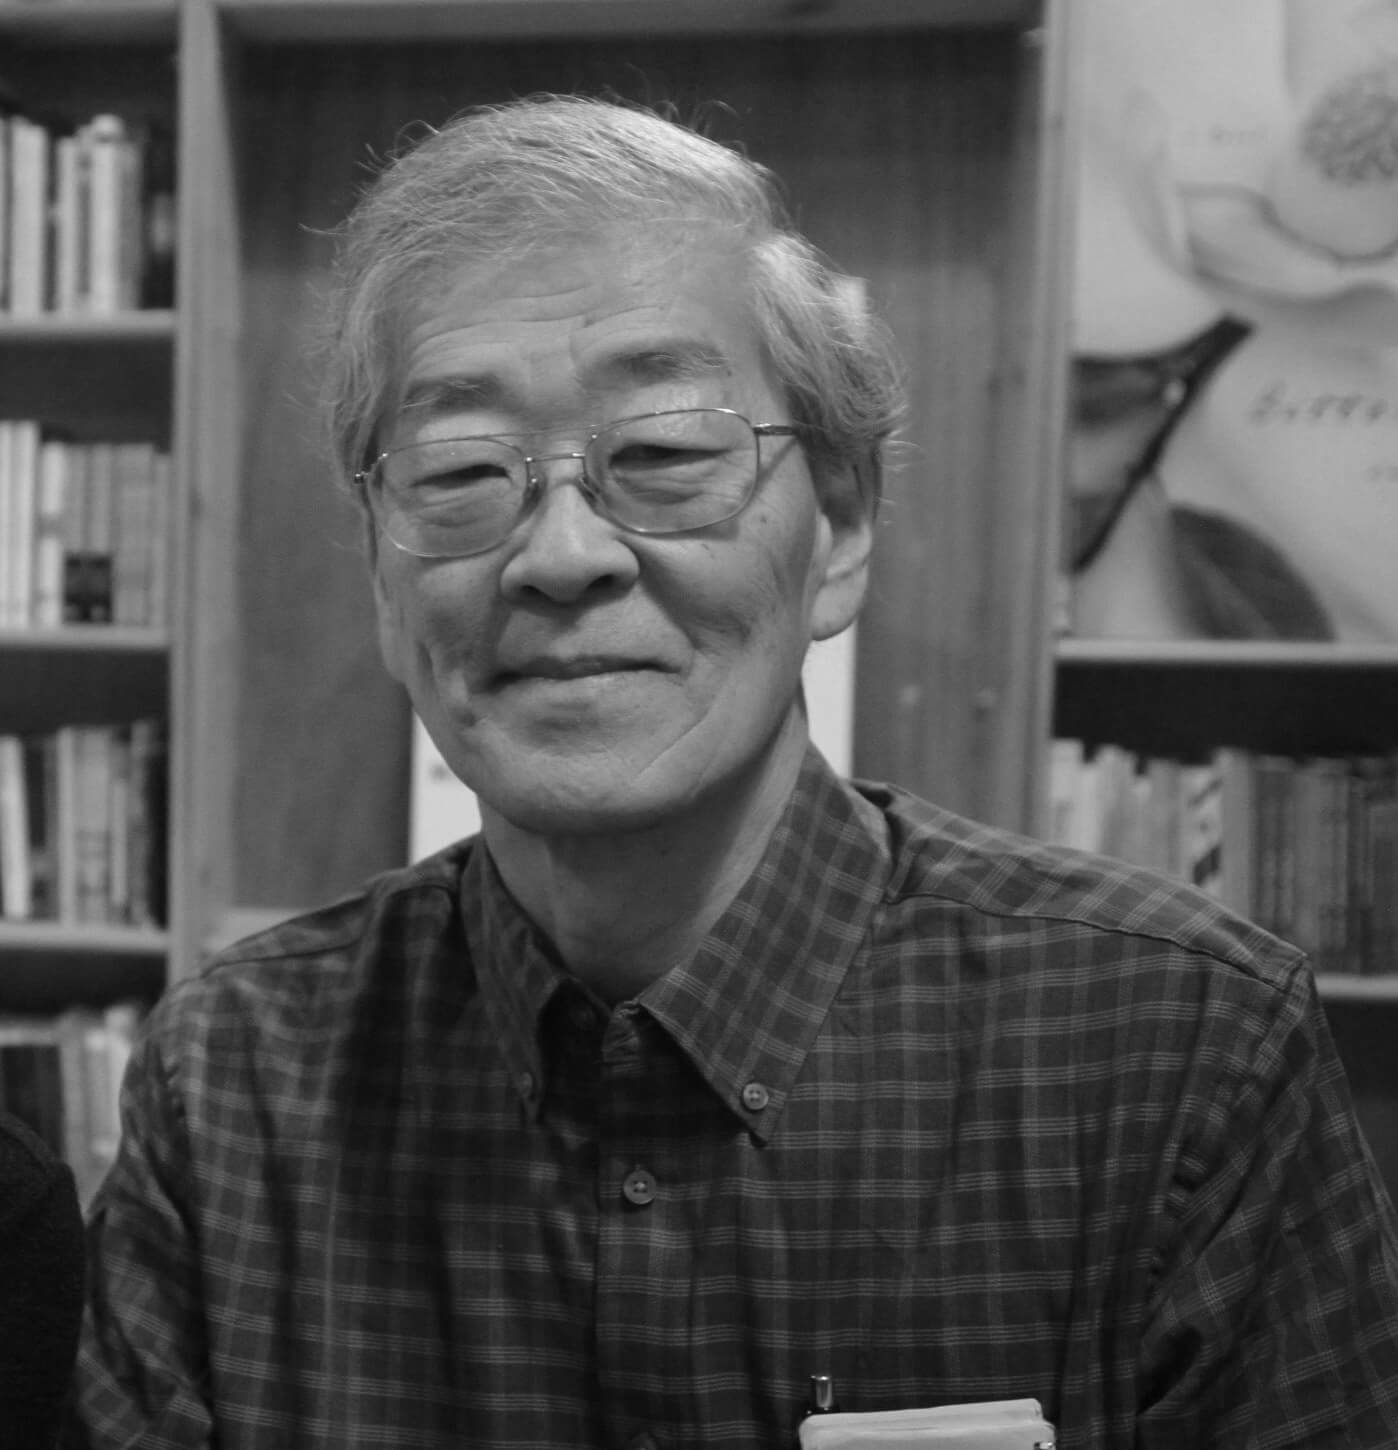 Portrait of Ramsay Liem, he wears a checkered shirt, and thin frames. He smiles at the camera. In the background there is a bookshelf and a painting.